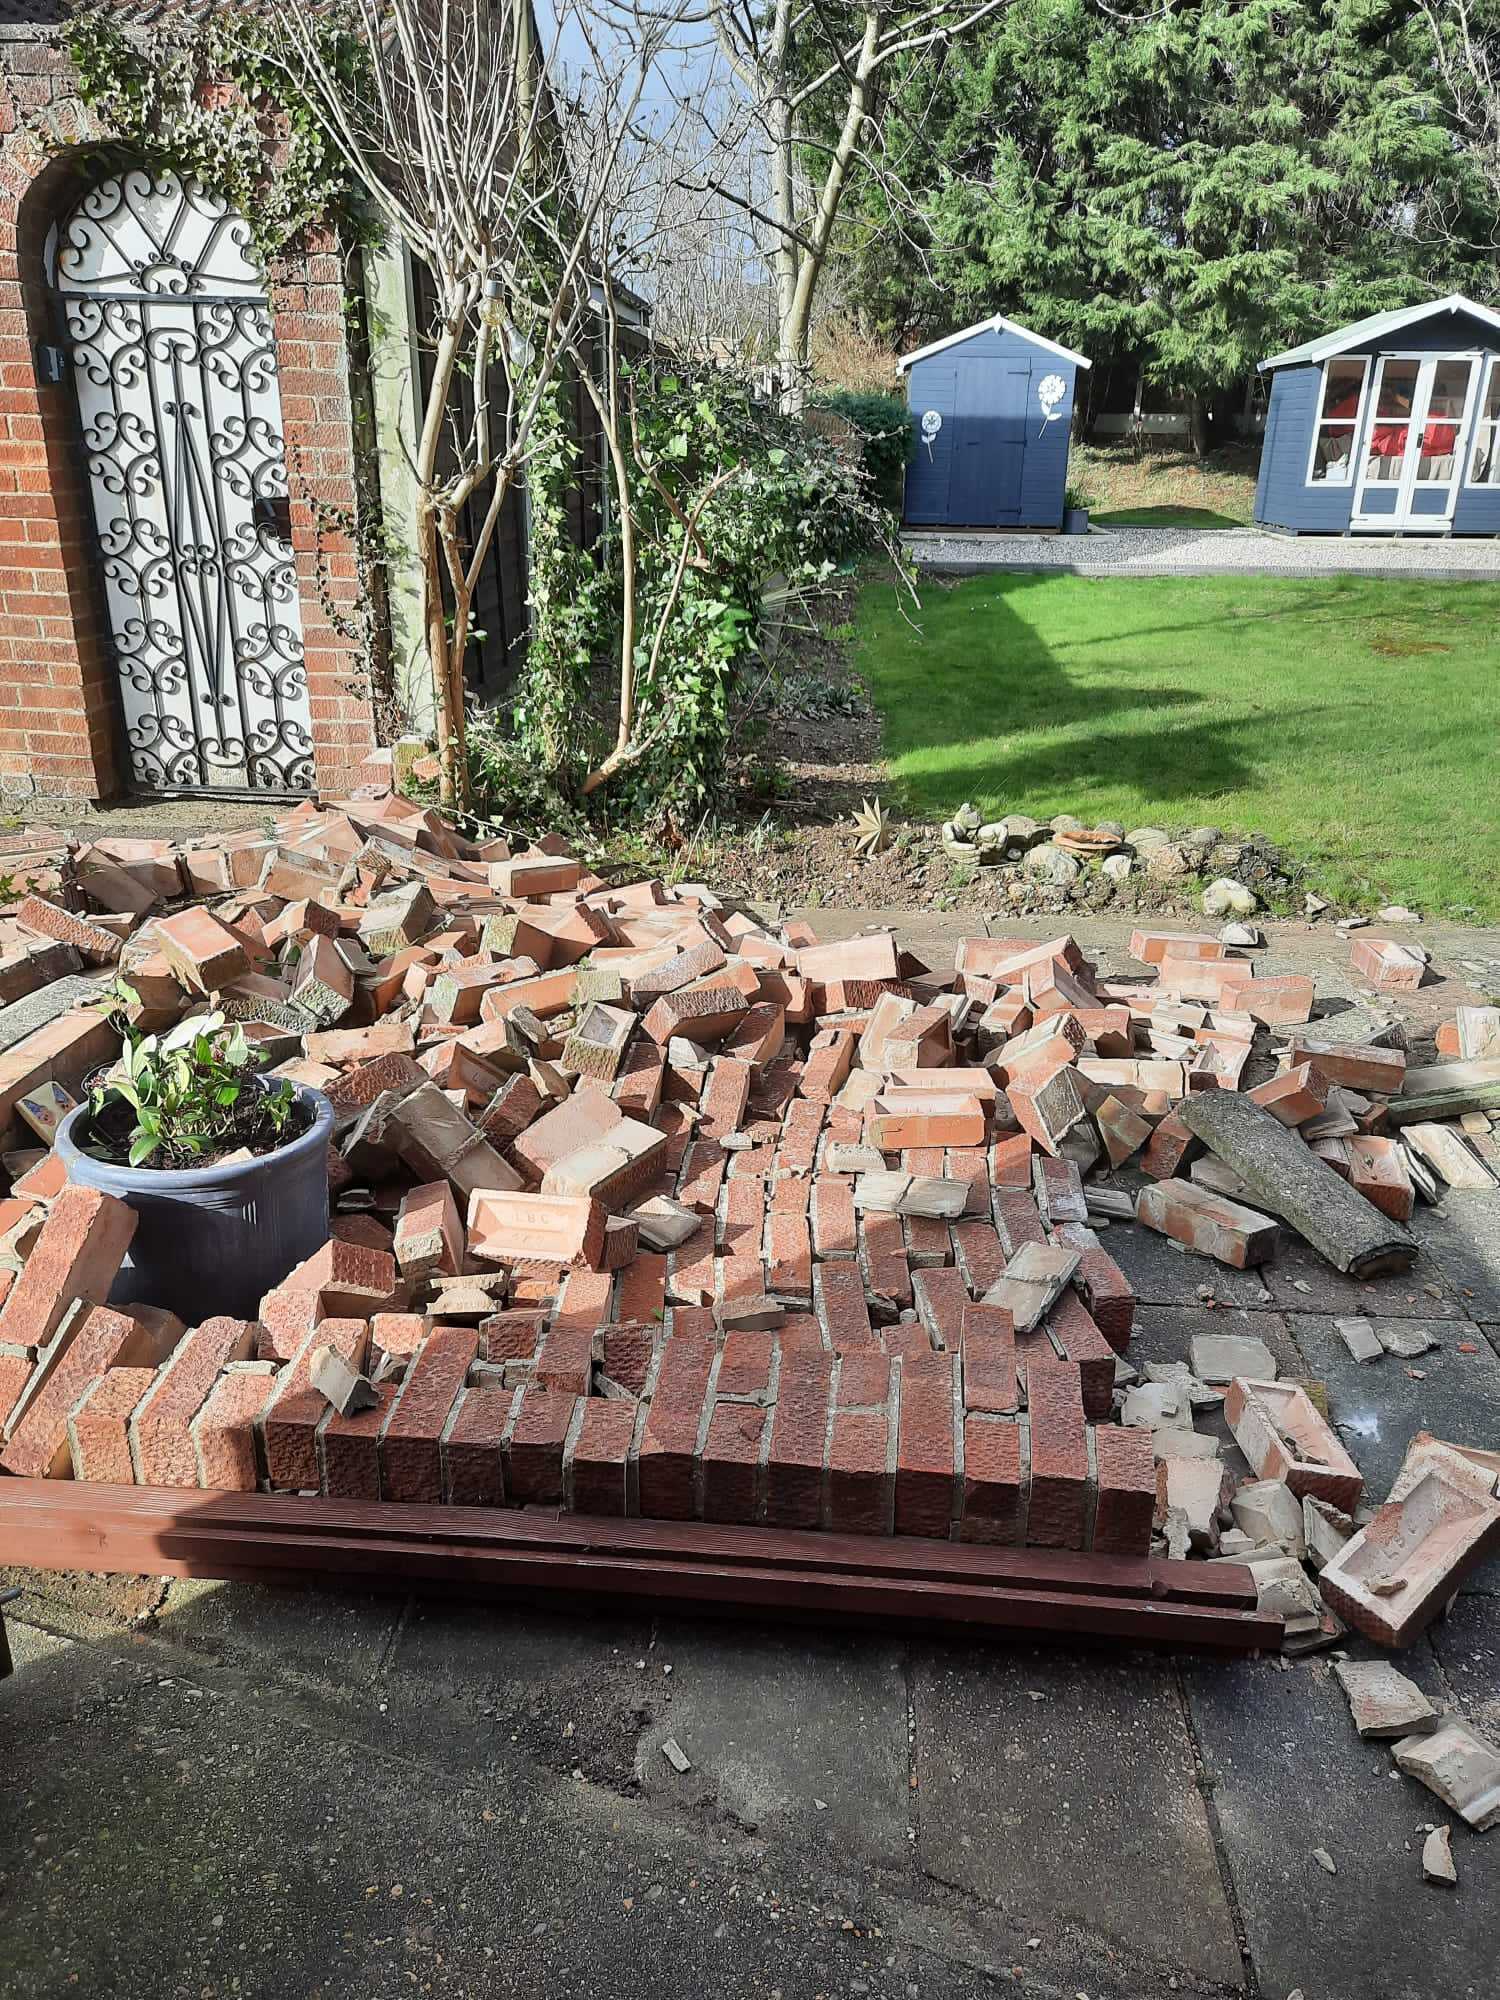 Toppled – even brick walls were not immune to the 78 mile per hour winds (Credit: Steve Raw)